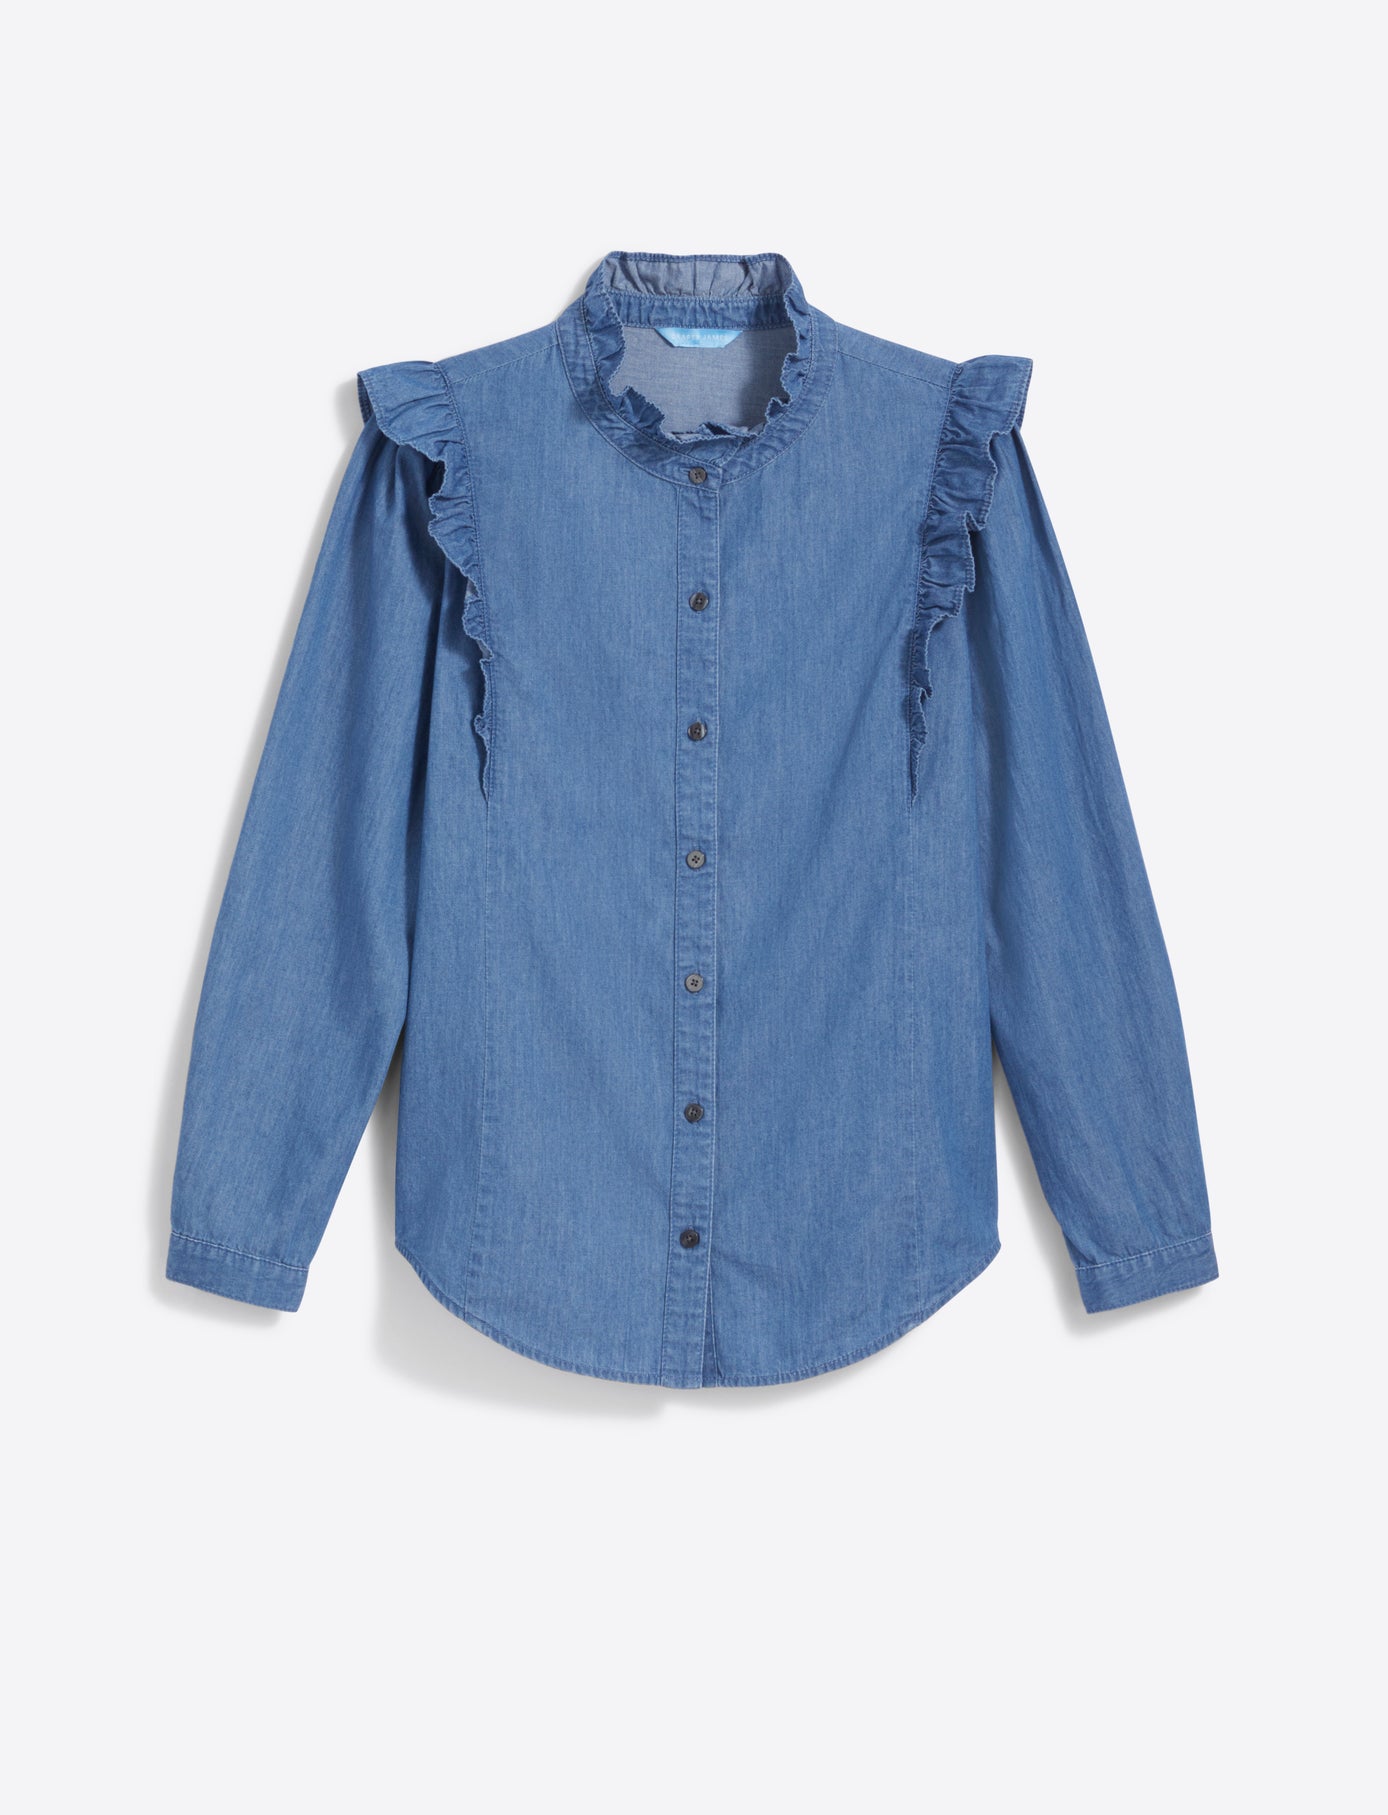 Connie Long Sleeve Top in Chambray